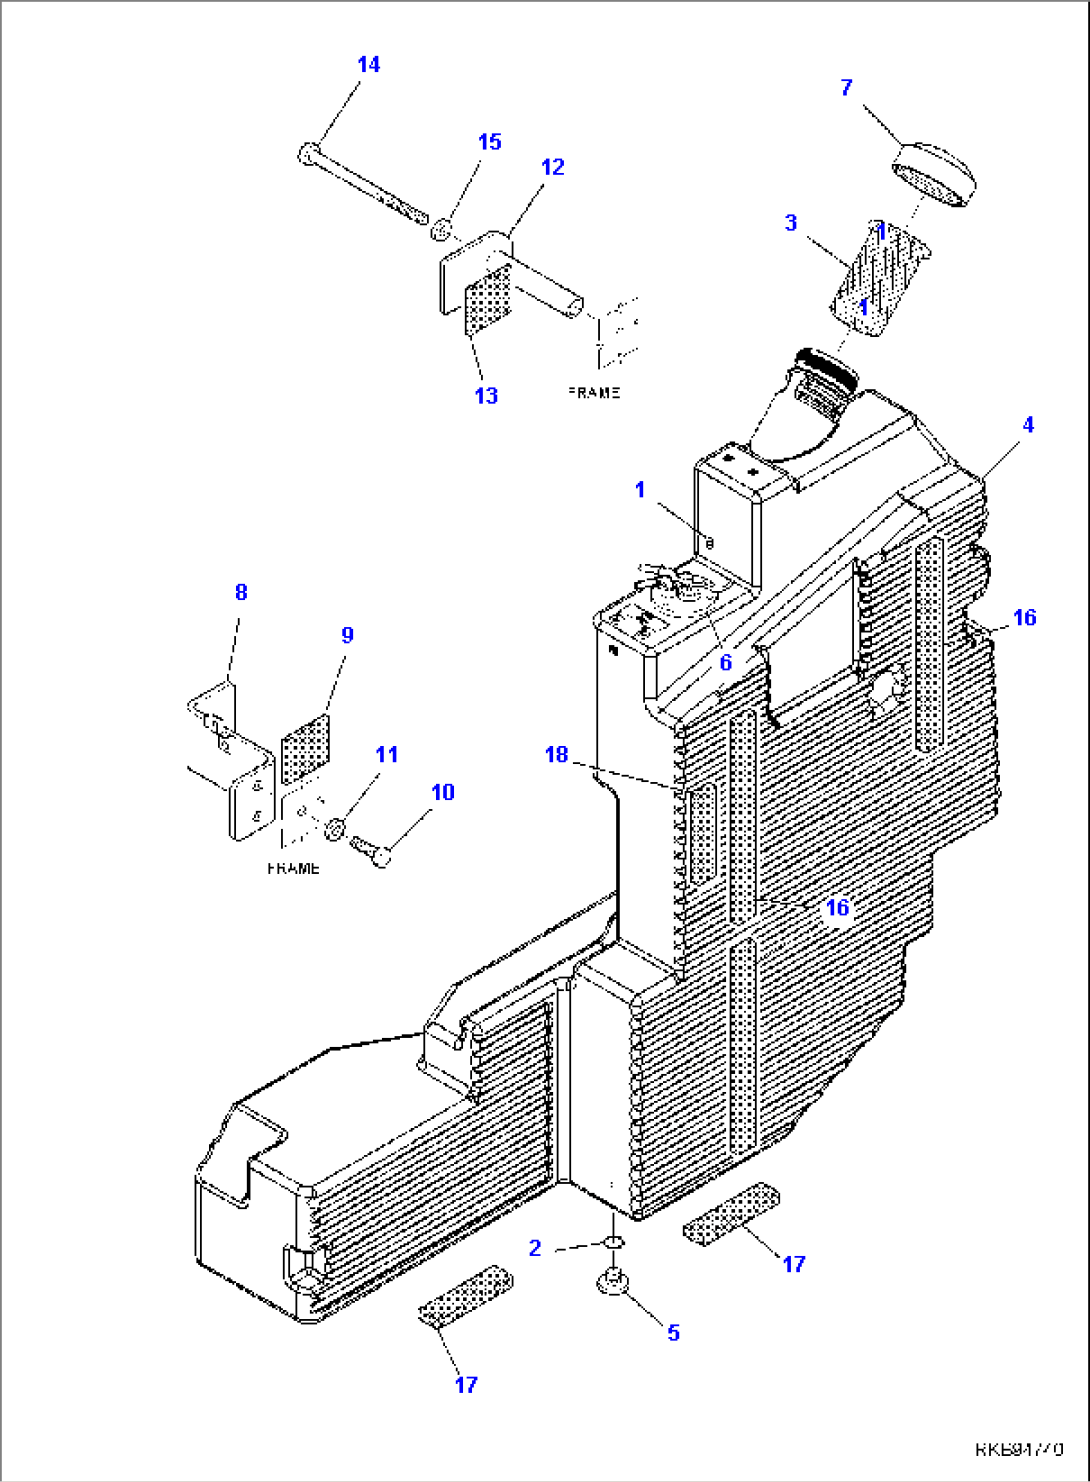 FUEL TANK, TANK RELATED PART